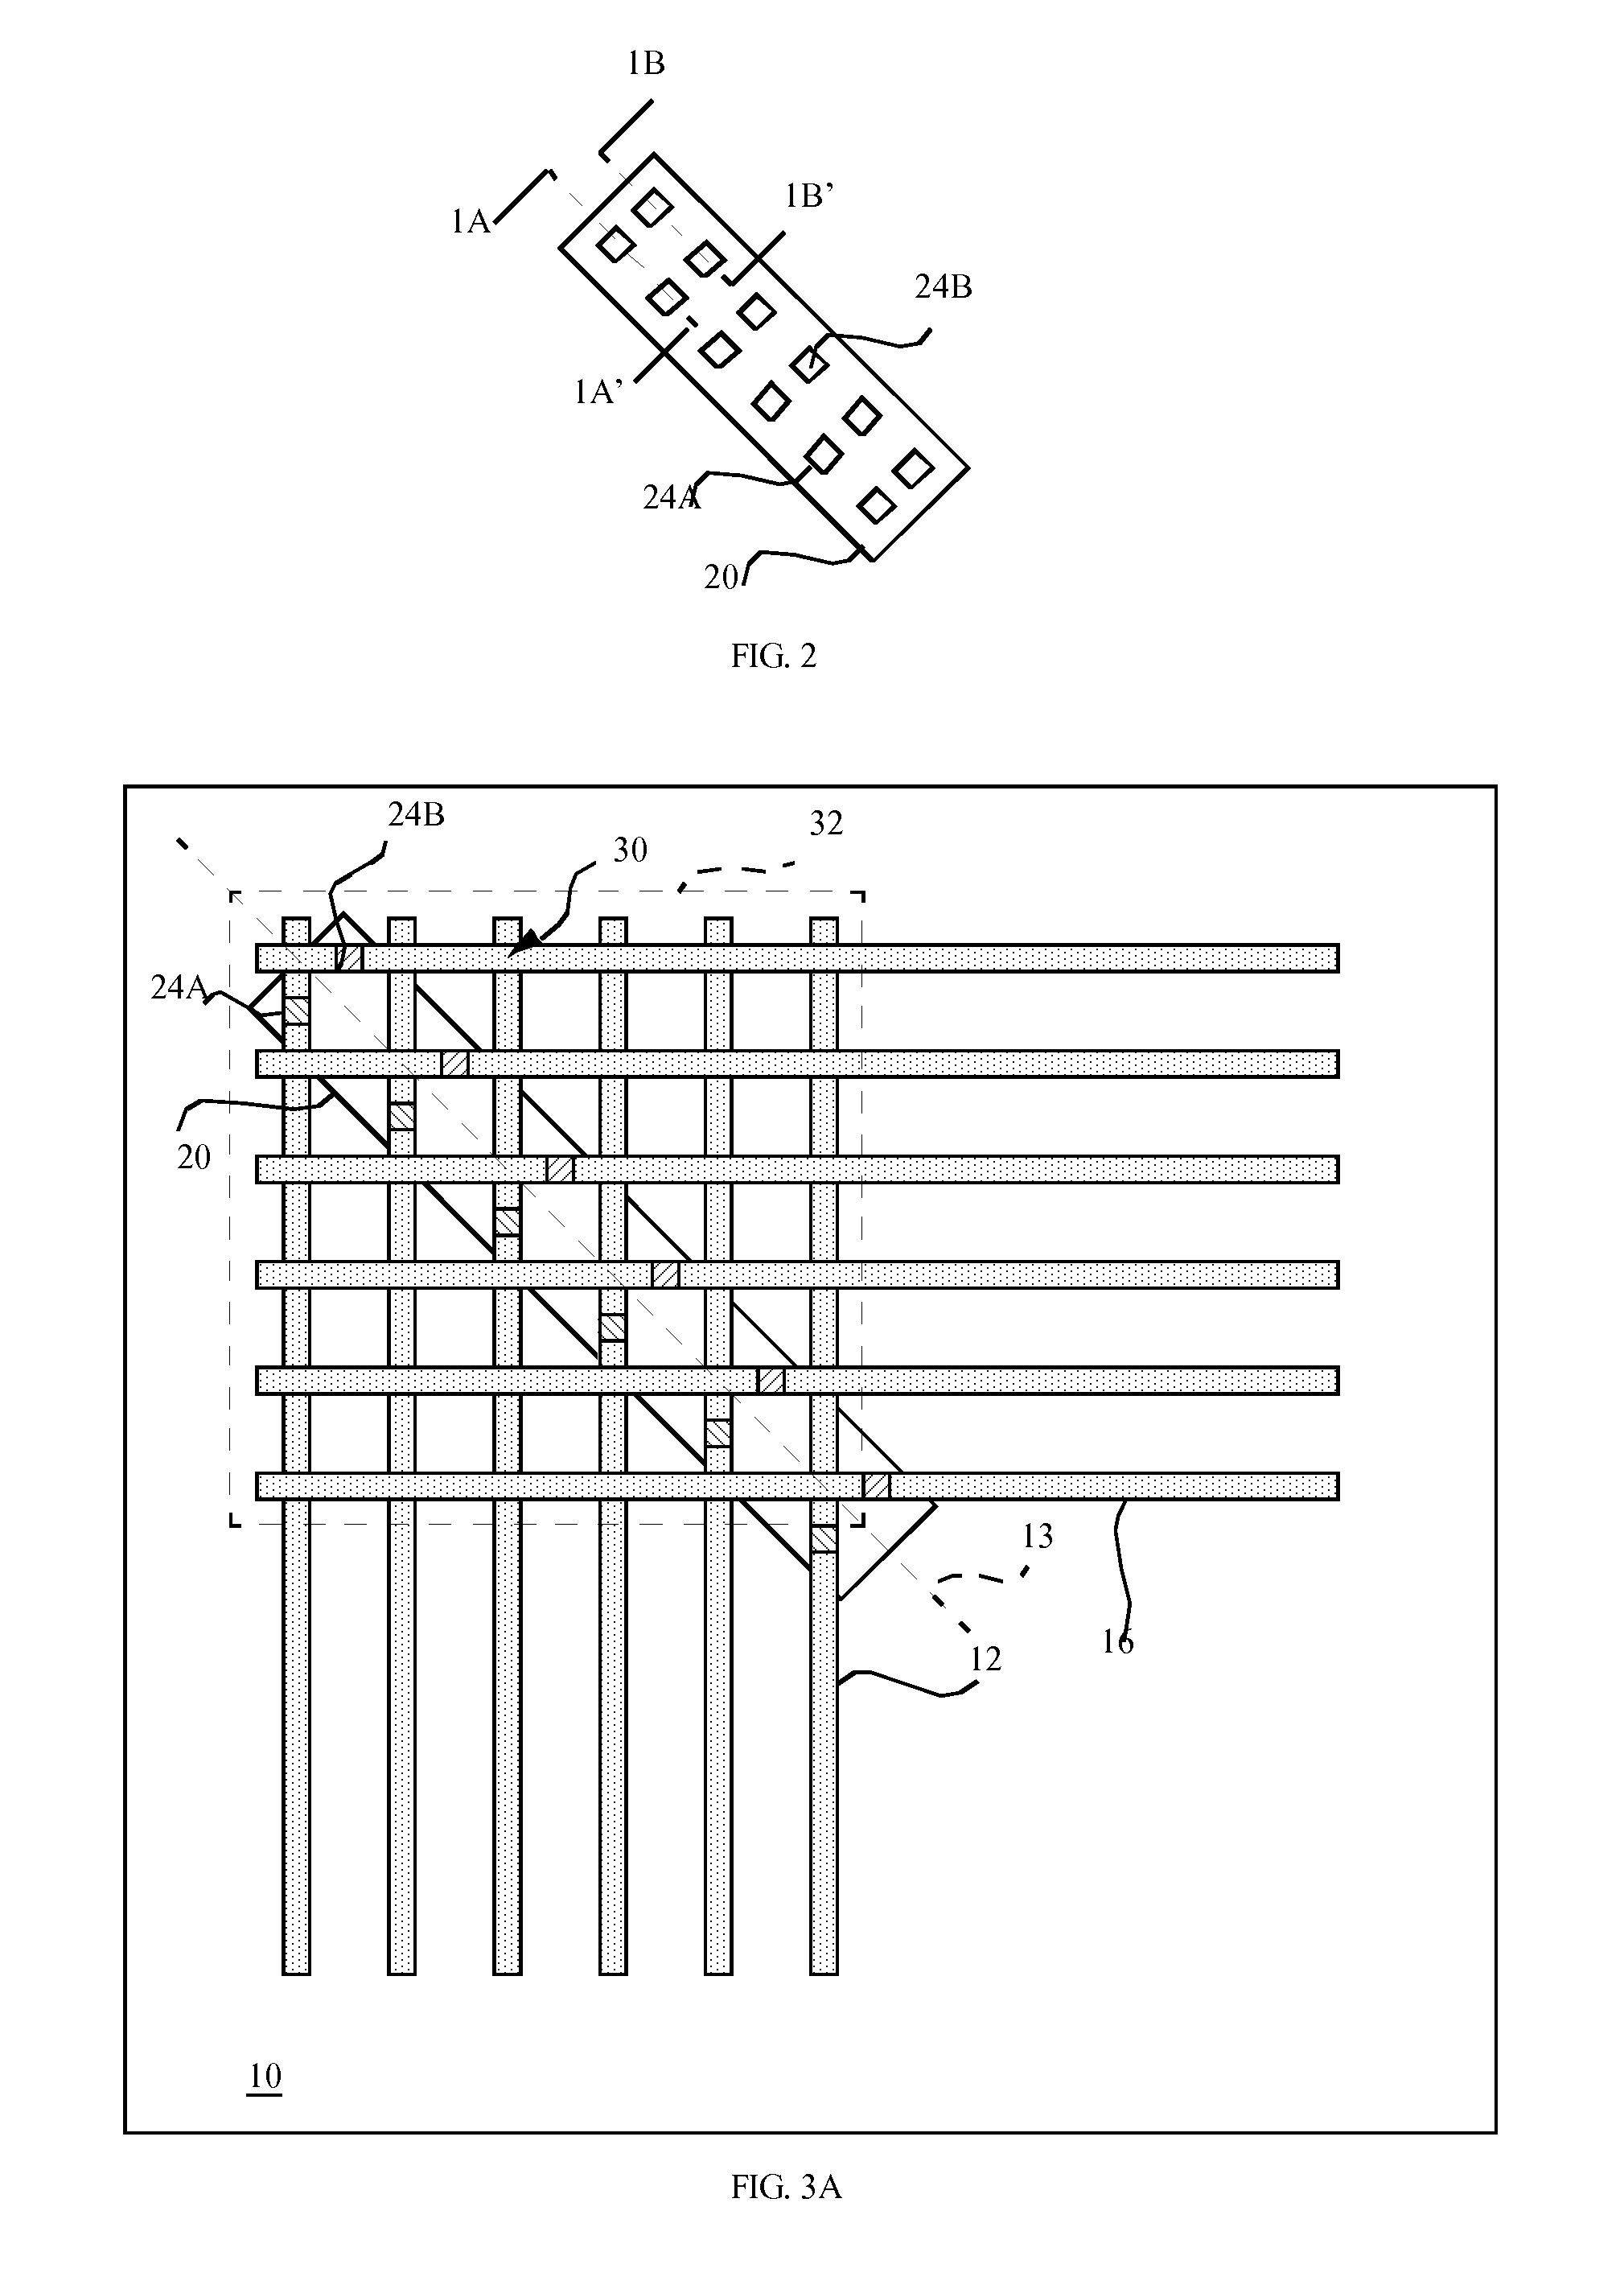 Display device with chiplet drivers